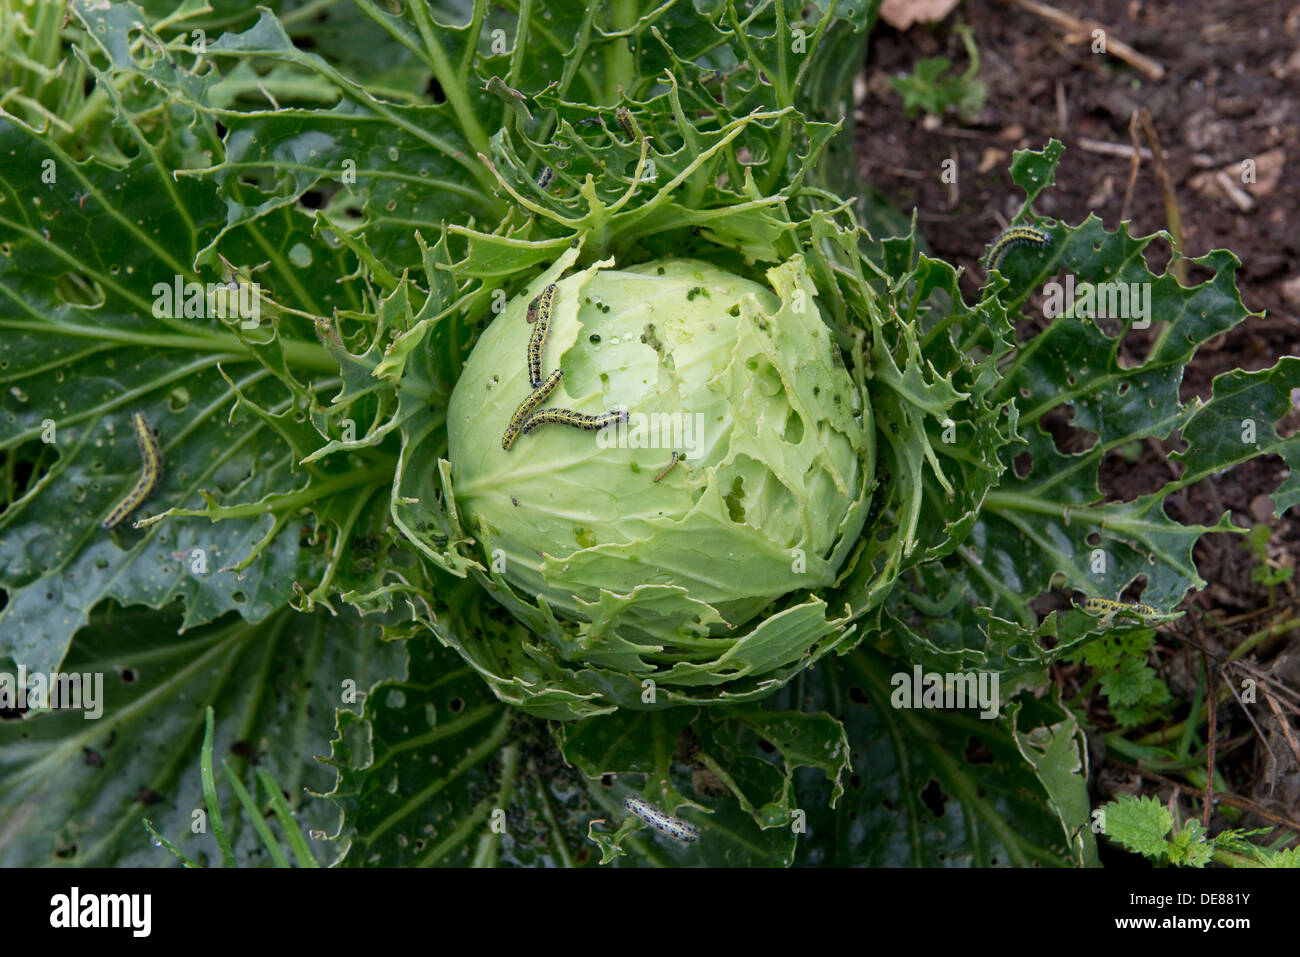 Cabbage white butterfly, Pieris brassicae, caterpillar damage to pointed cabbage plant leaves Stock Photo